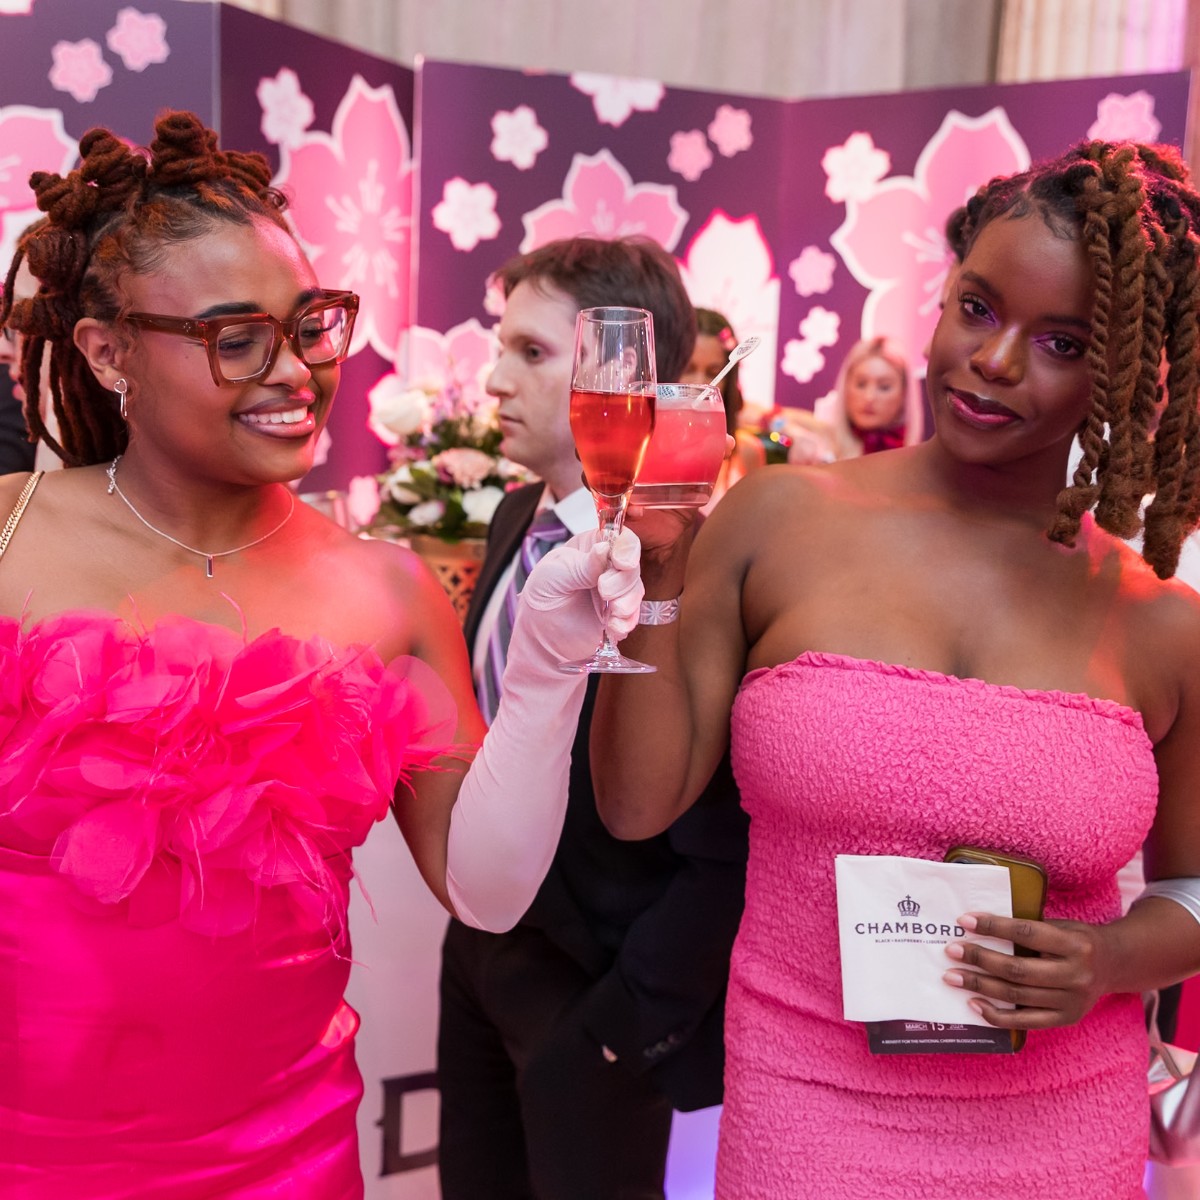 🌸 #ThrowbackThursday 🌸

Throwing it back to #PinkTieParty presented by @UnionStation_DC & @DesignCuisine! We're sending a huge thank you to our incredible media sponsors, @audacy, @washblade, @washingtonian for helping us spread the cherry blossom cheer far & wide! 🎶